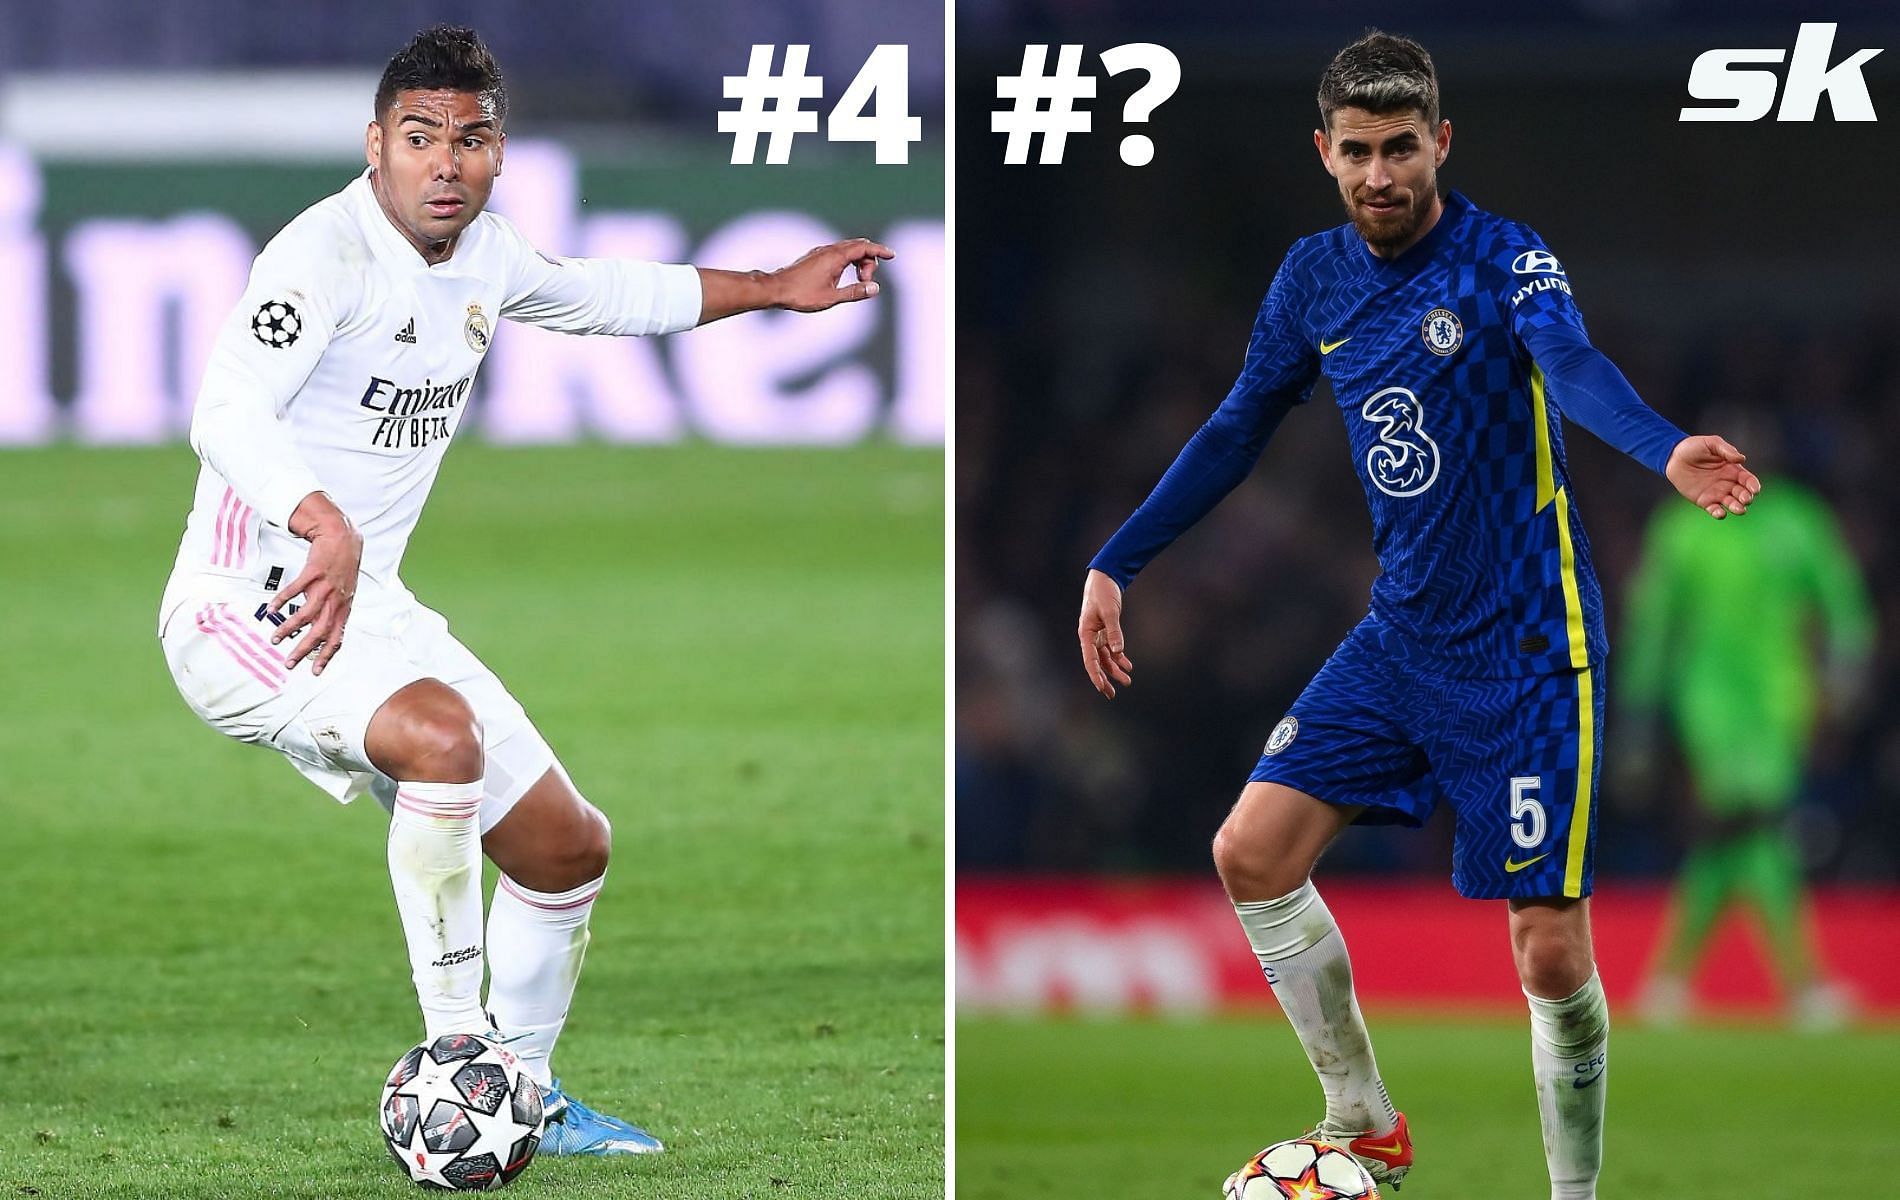 Who is the best ball-winning midfielder in the world at the moment?